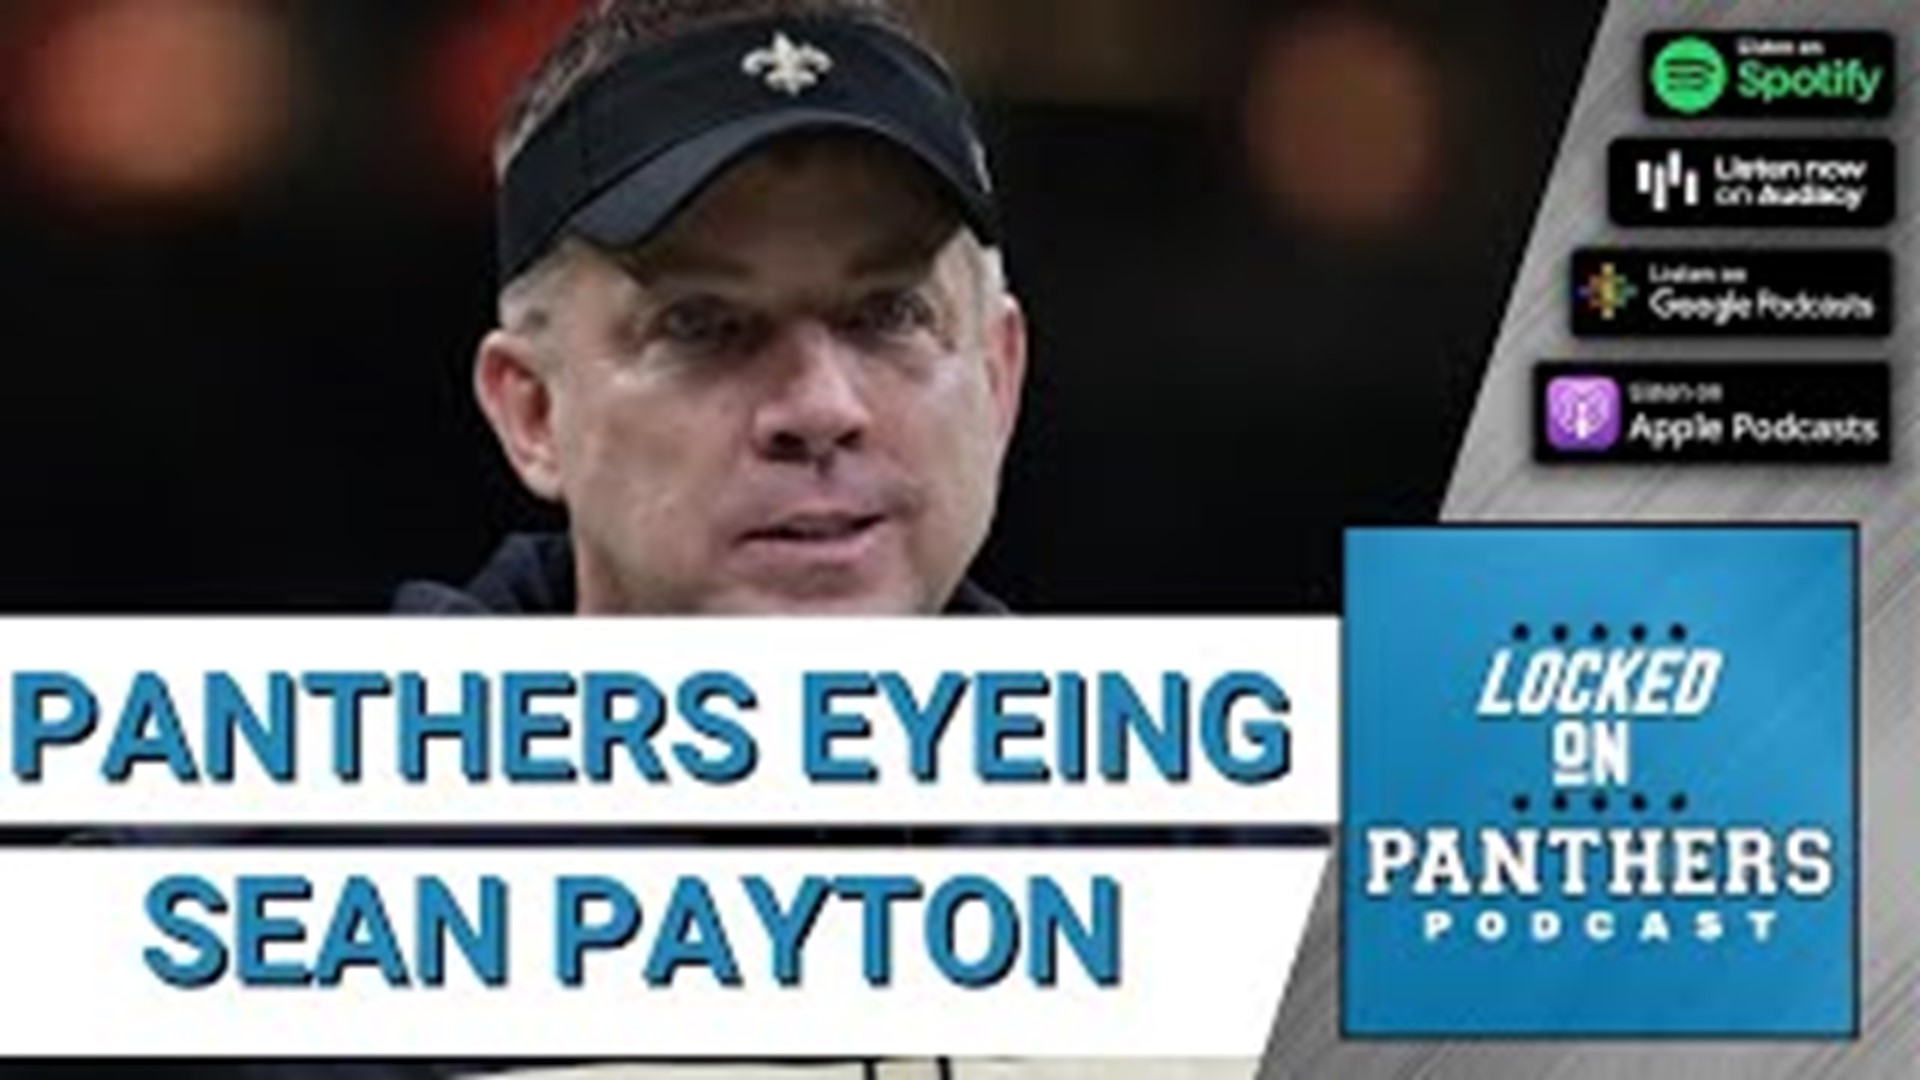 Questions surrounding the status of embattled Panthers head coach Matt Rhule continue amid reports the team is eyeing Sean Payton.